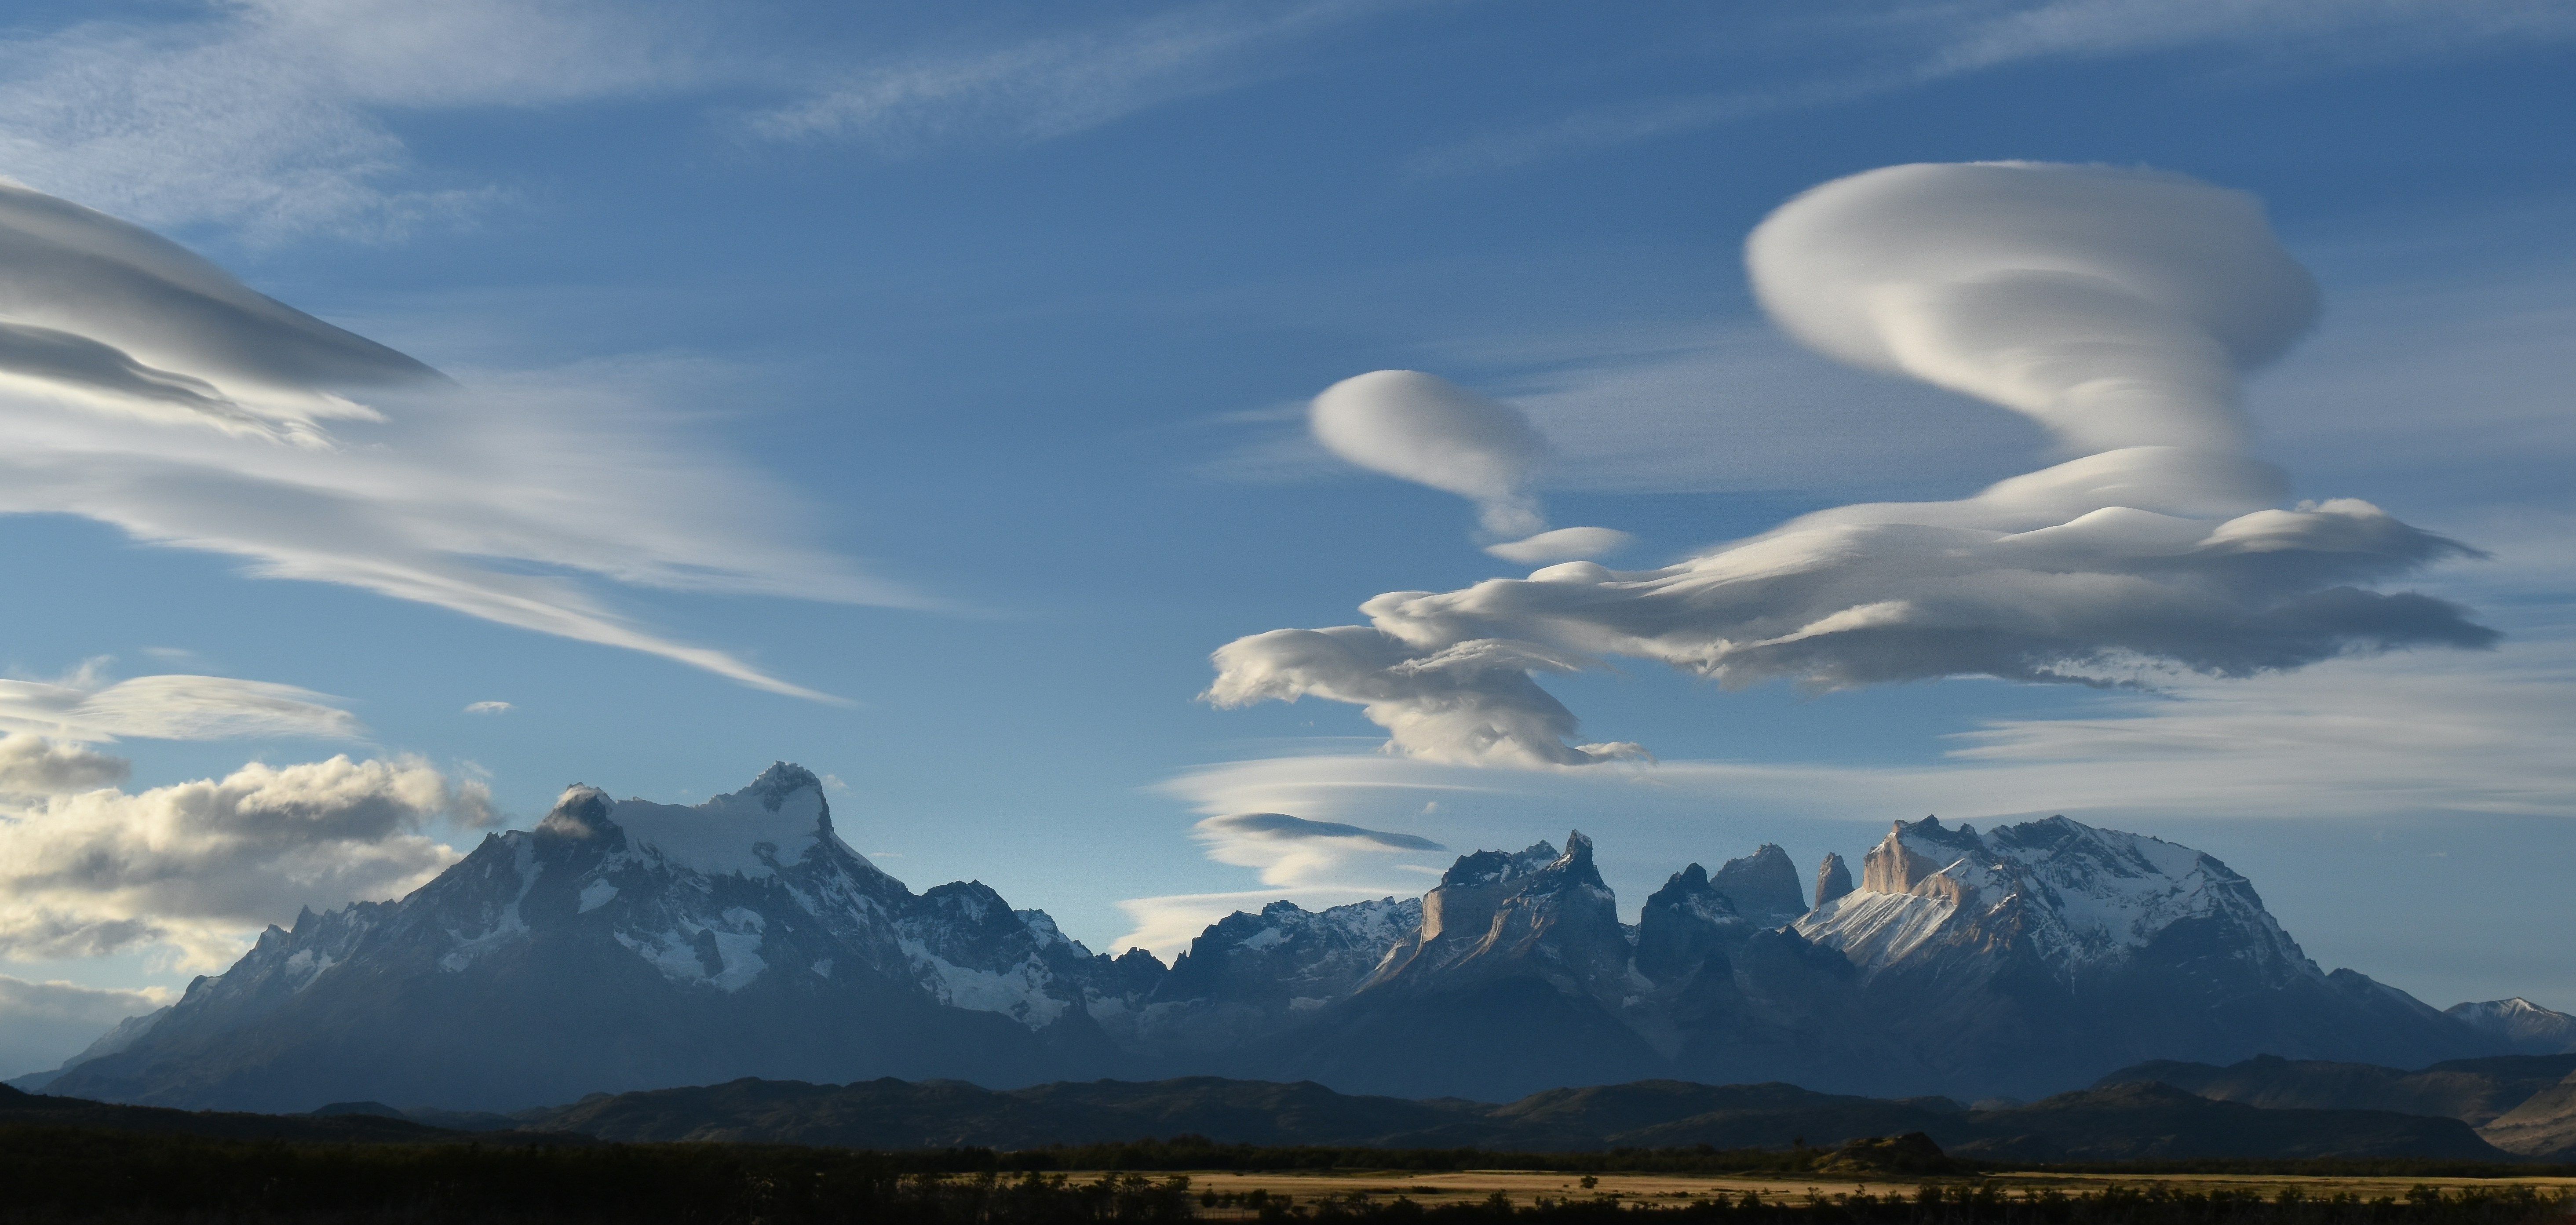 Chantilly clouds over Cuernos del Paine